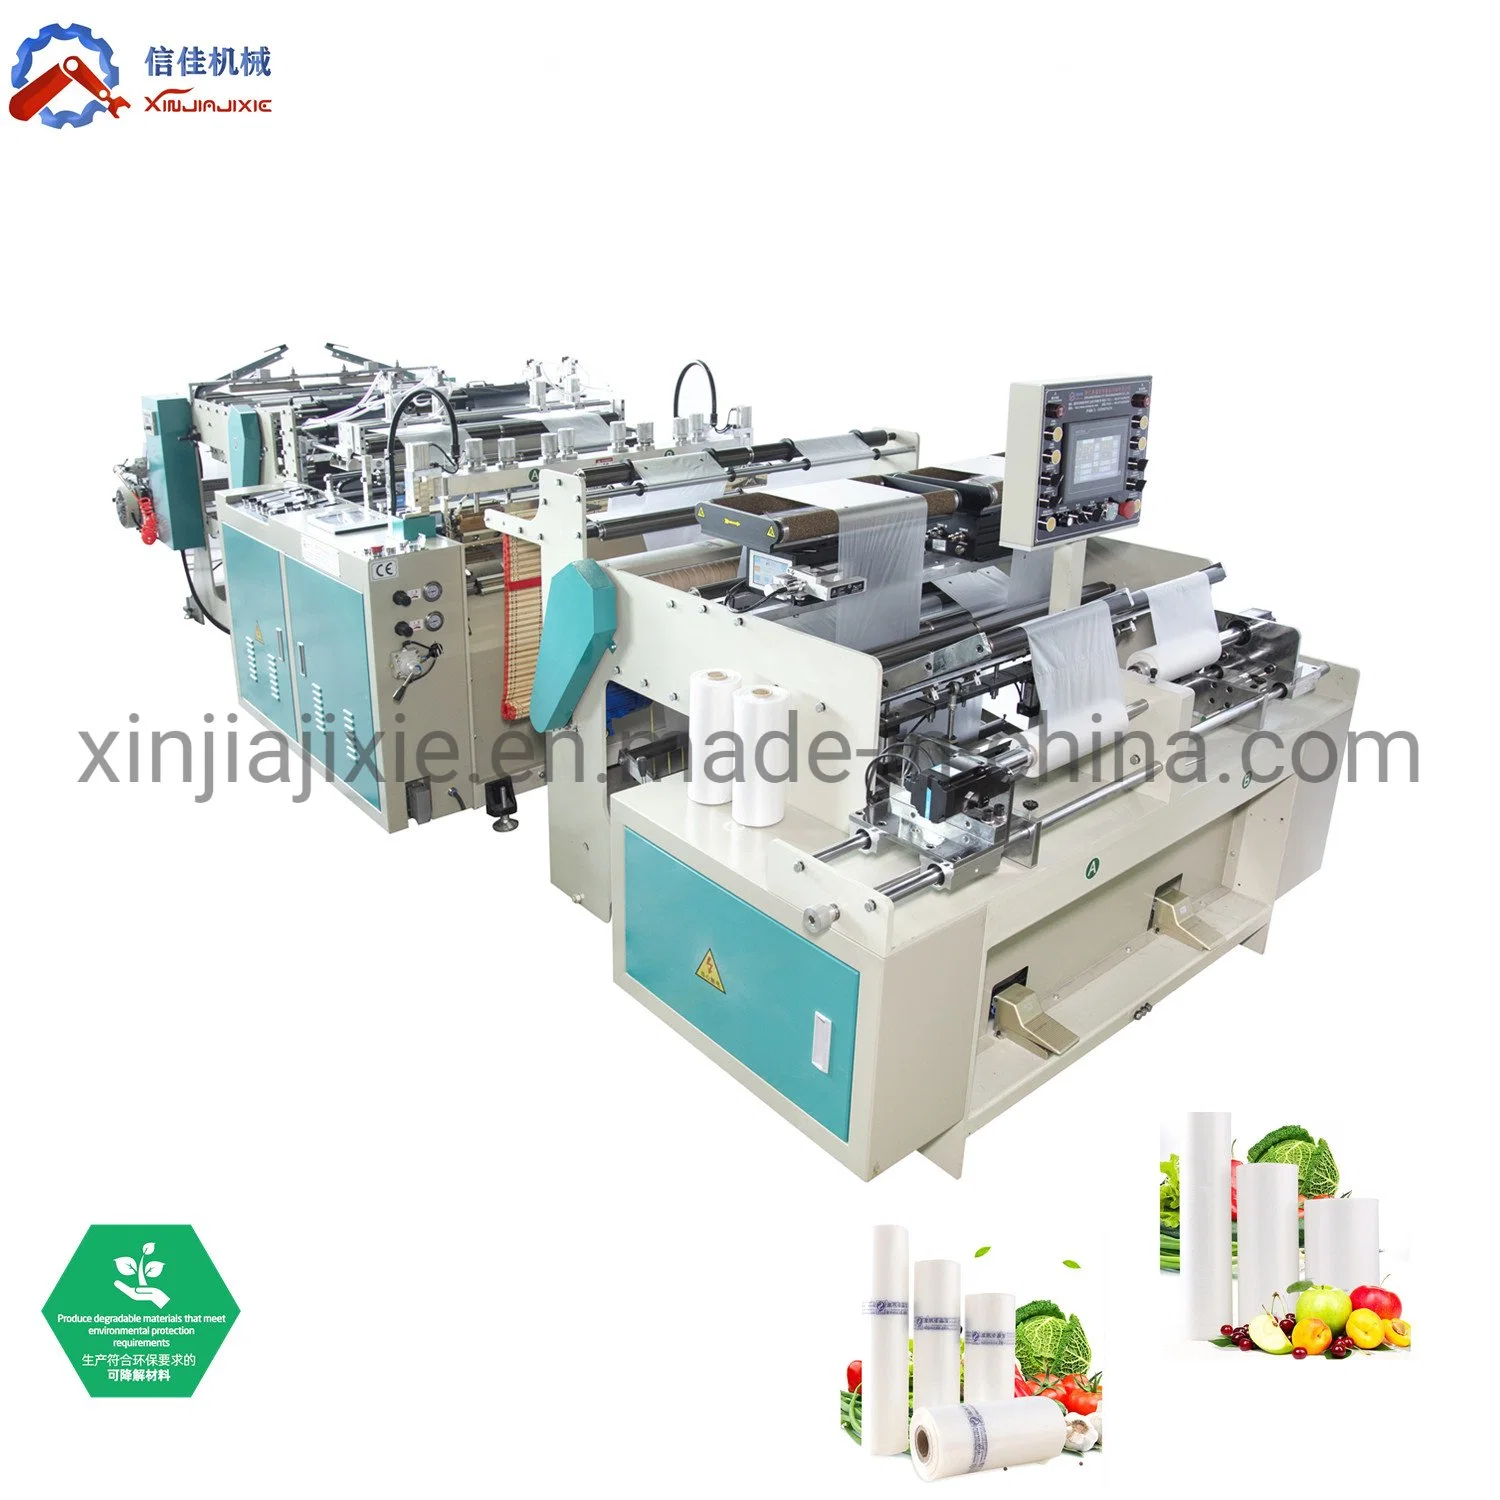 Fully Automatic Plastic PE /Biodegradable Vegetable Fruit Supermarket Bag-on-Roll with Core Making Machine or Without Paper Core